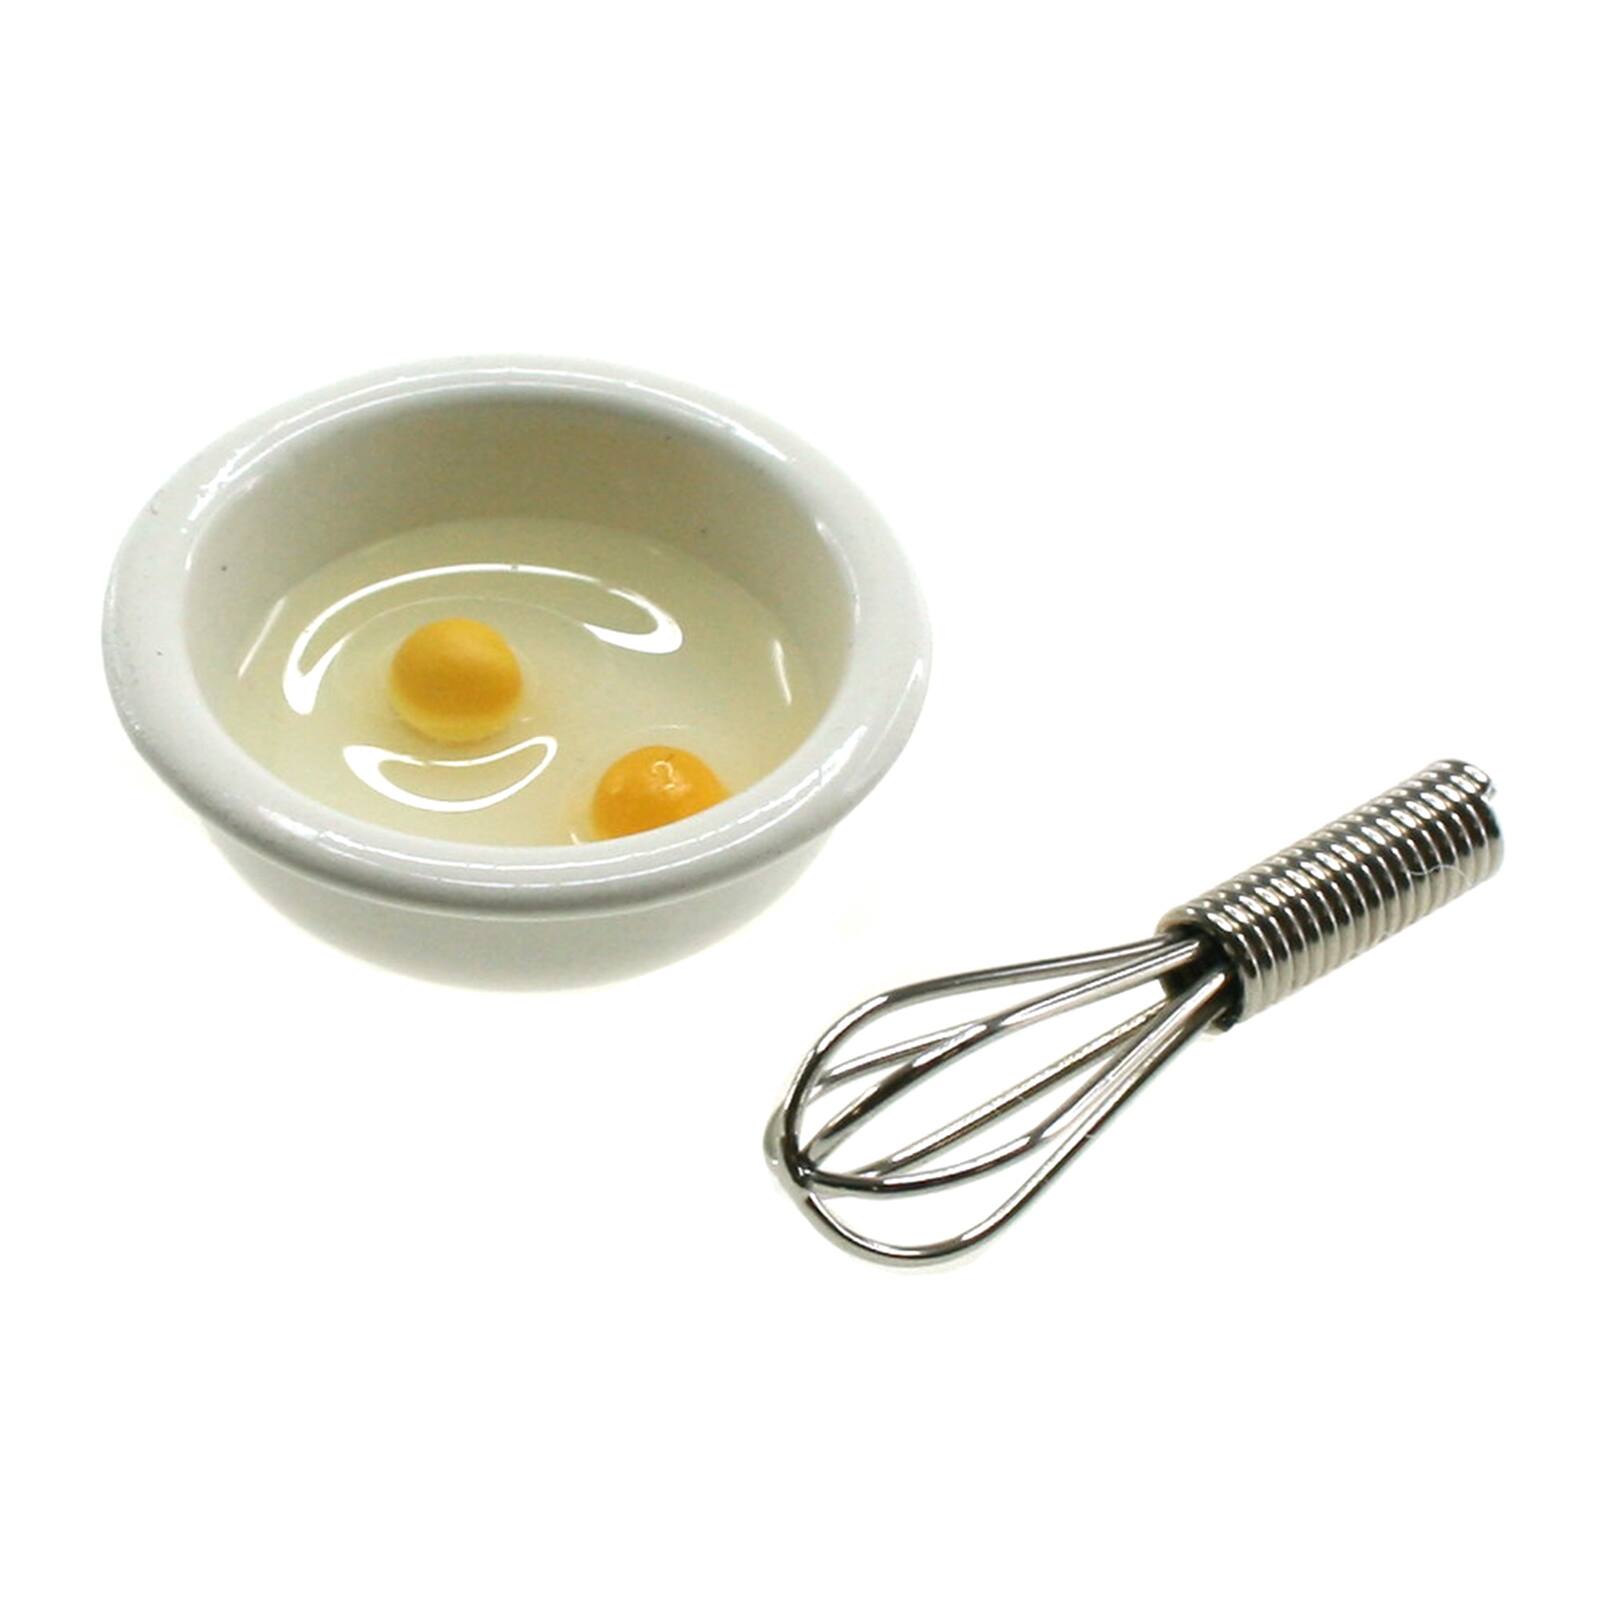 Eggs in Bowl & Whisk 1:12 Scale for Dolls House Kitchen 